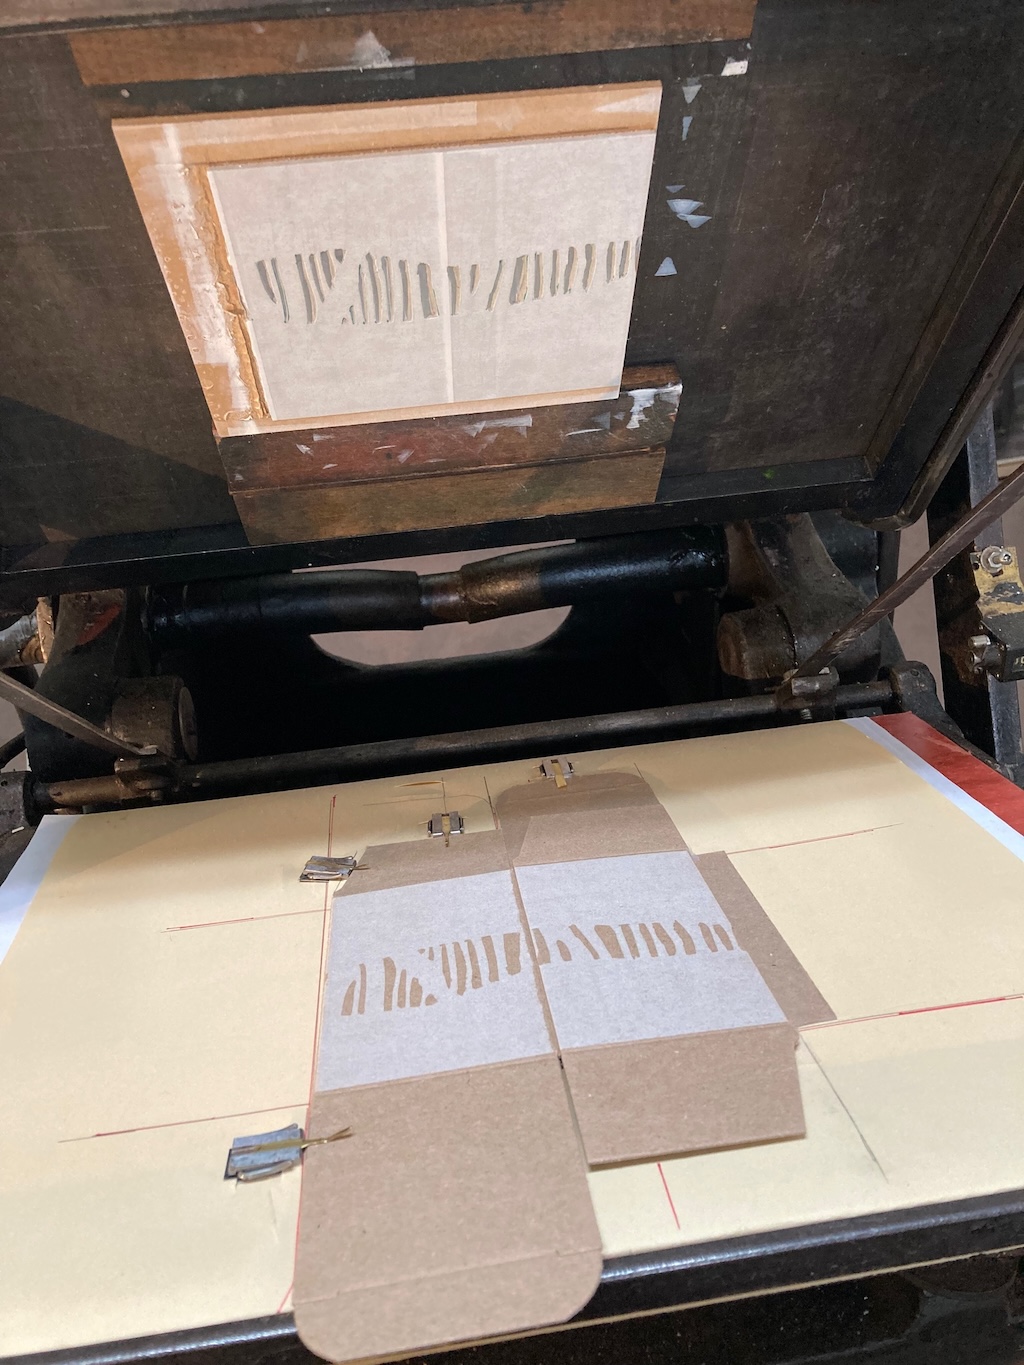 The lino block on the printing press, covered in white ink; below is the printed cardboard box with the white layer.